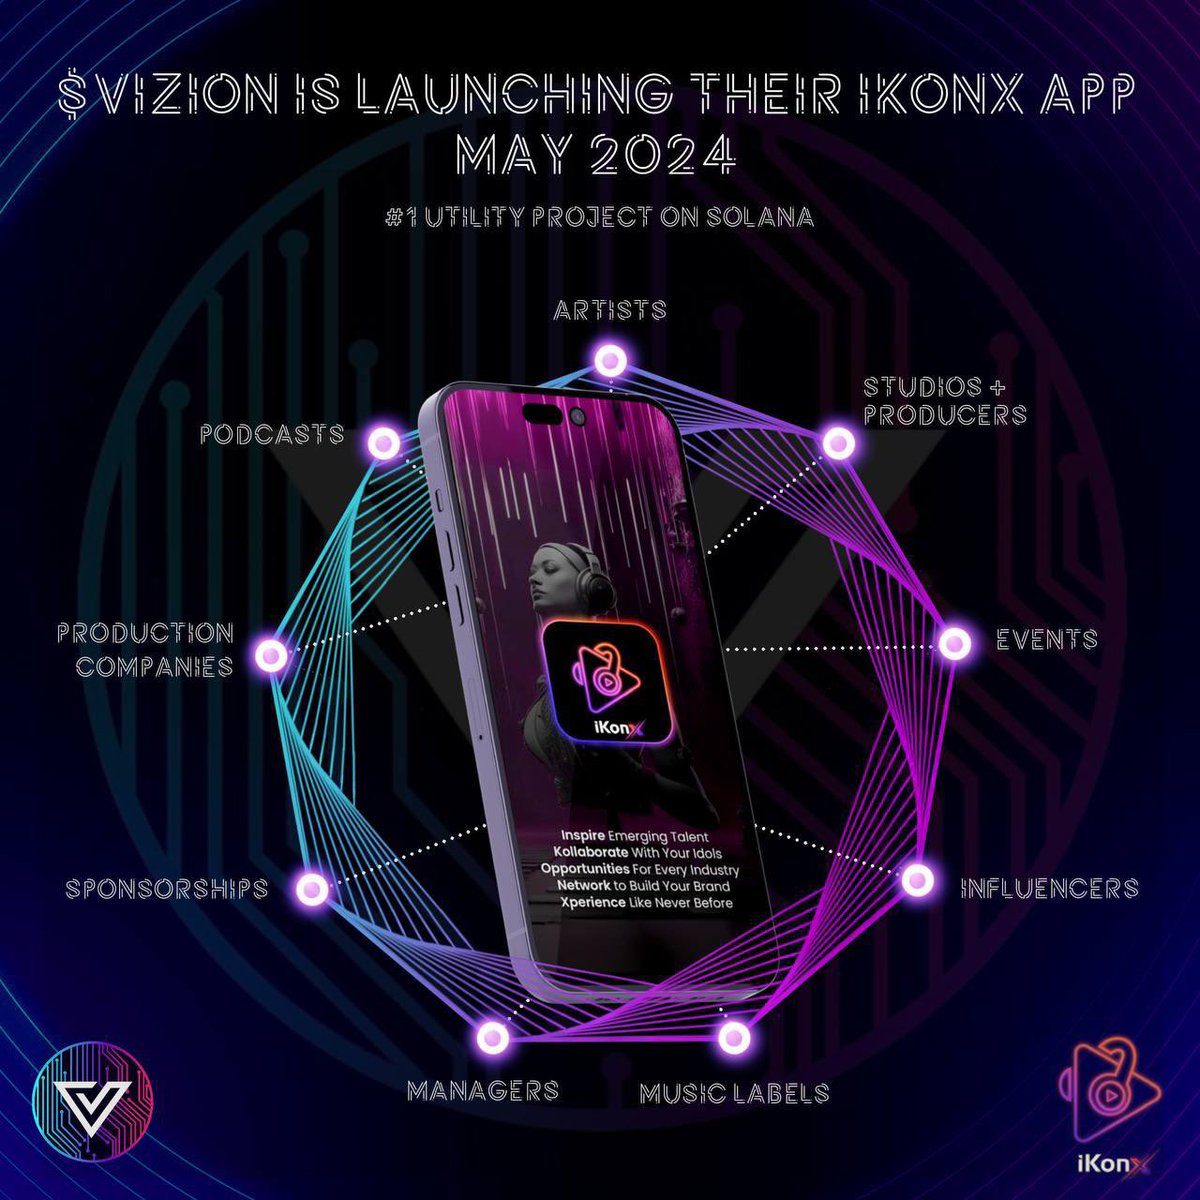 💥 $VIZION + their team are absolutely crushing it on Solana - this community is unreal💥 💎 DO NOT FADE @viziontoken💎 CA: 4giiLHQPdcuFnVcuBF7wpmfU88EXDdToJqBP8dfpSjtA TG: t.me/vizionhyperoom